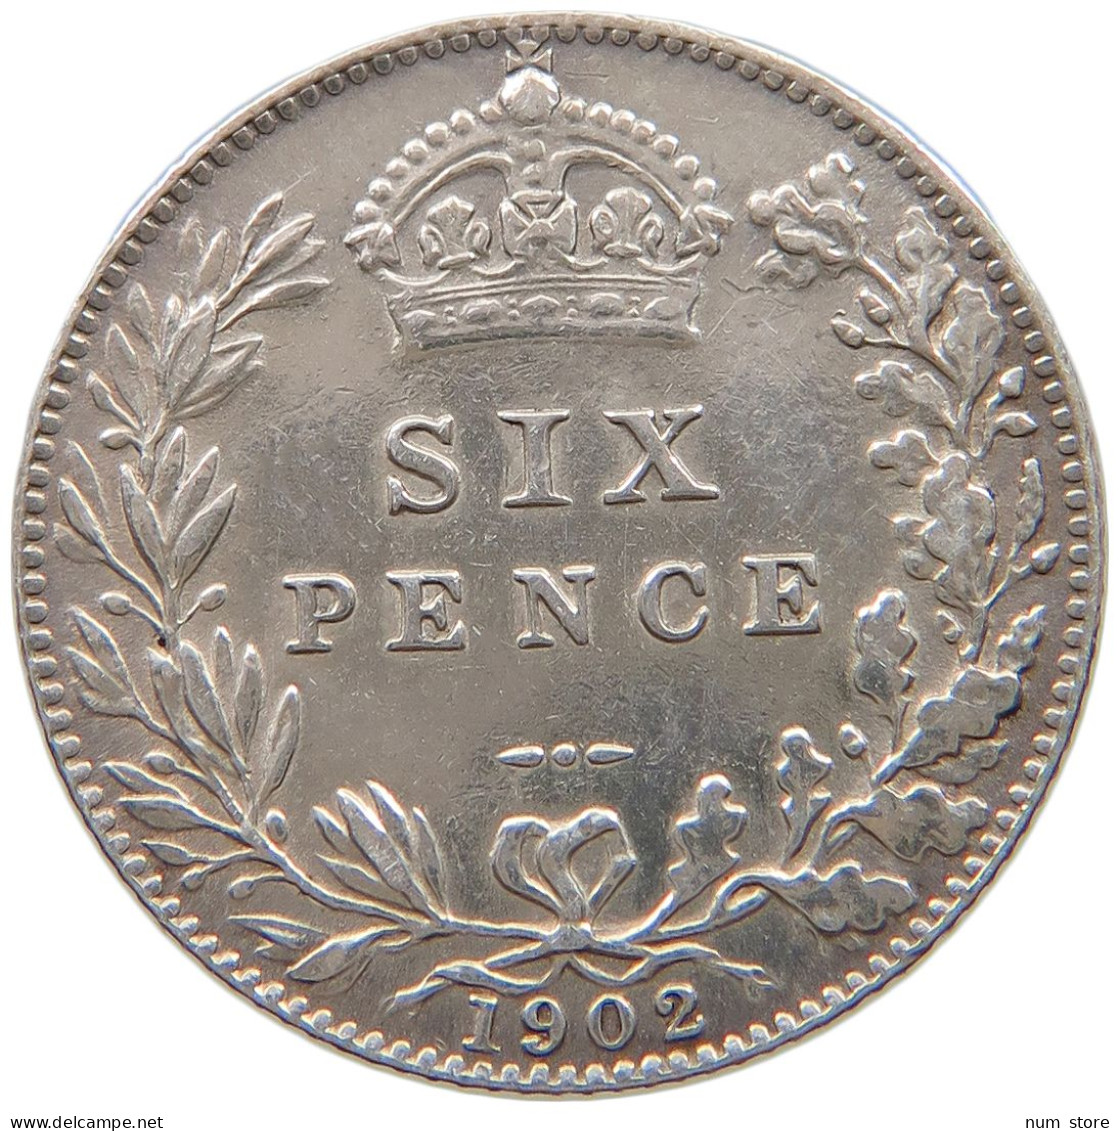 GREAT BRITAIN SIXPENCE 1902 Edward VII., 1901 - 1910 #t107 0455 - H. 6 Pence